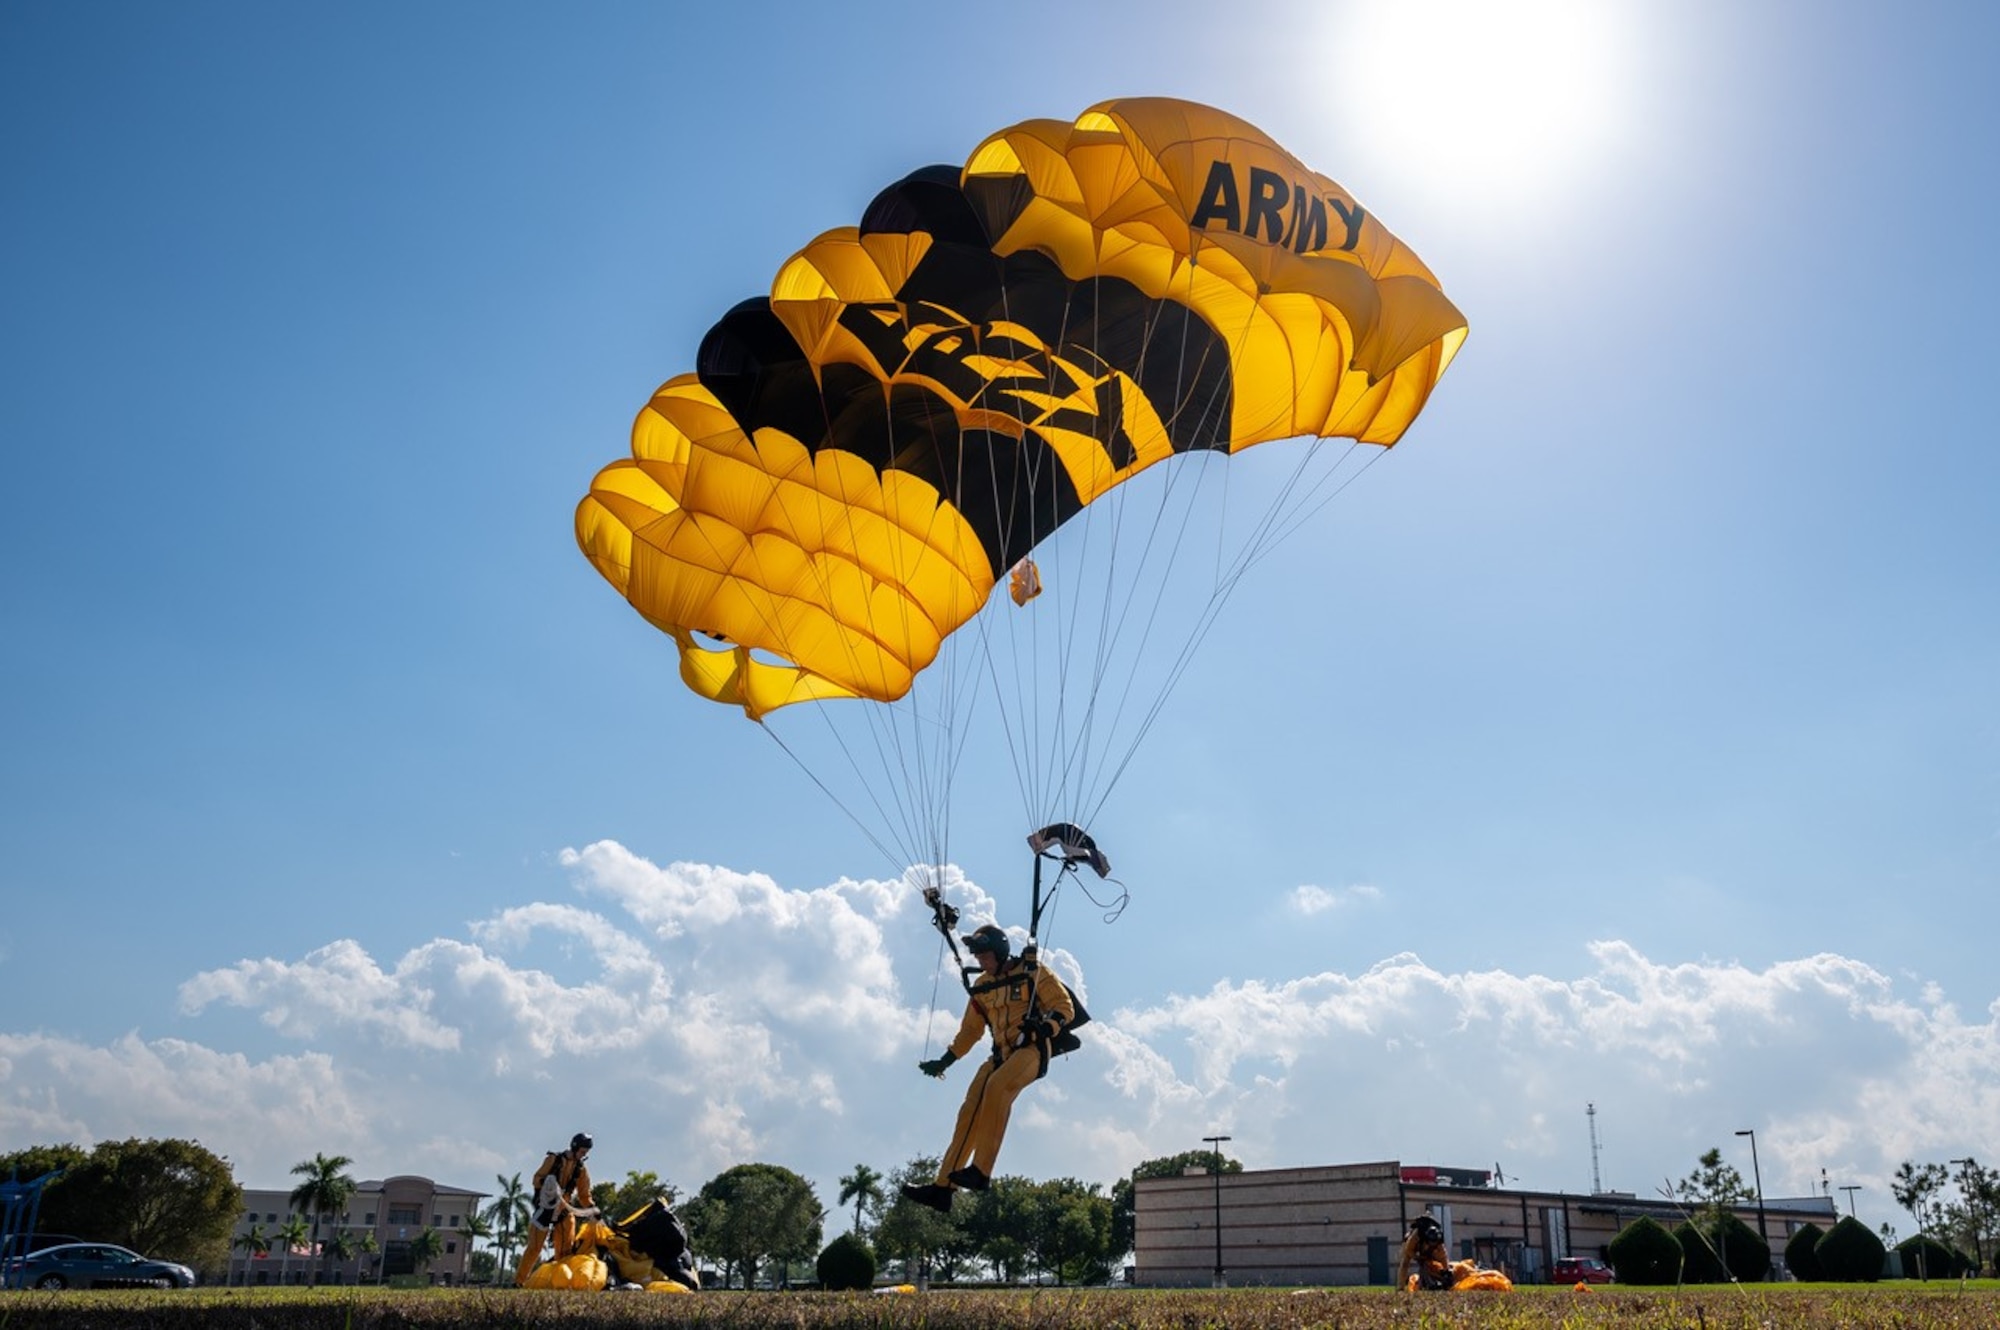 A member ofo the U.S. Army Parachute Team, The Golden Knights prepare to land on the drop zone during Winter Training on Jan. 26, 2023. (U.S. Air Force photo by Tech. Sgt. Leo Castellano)